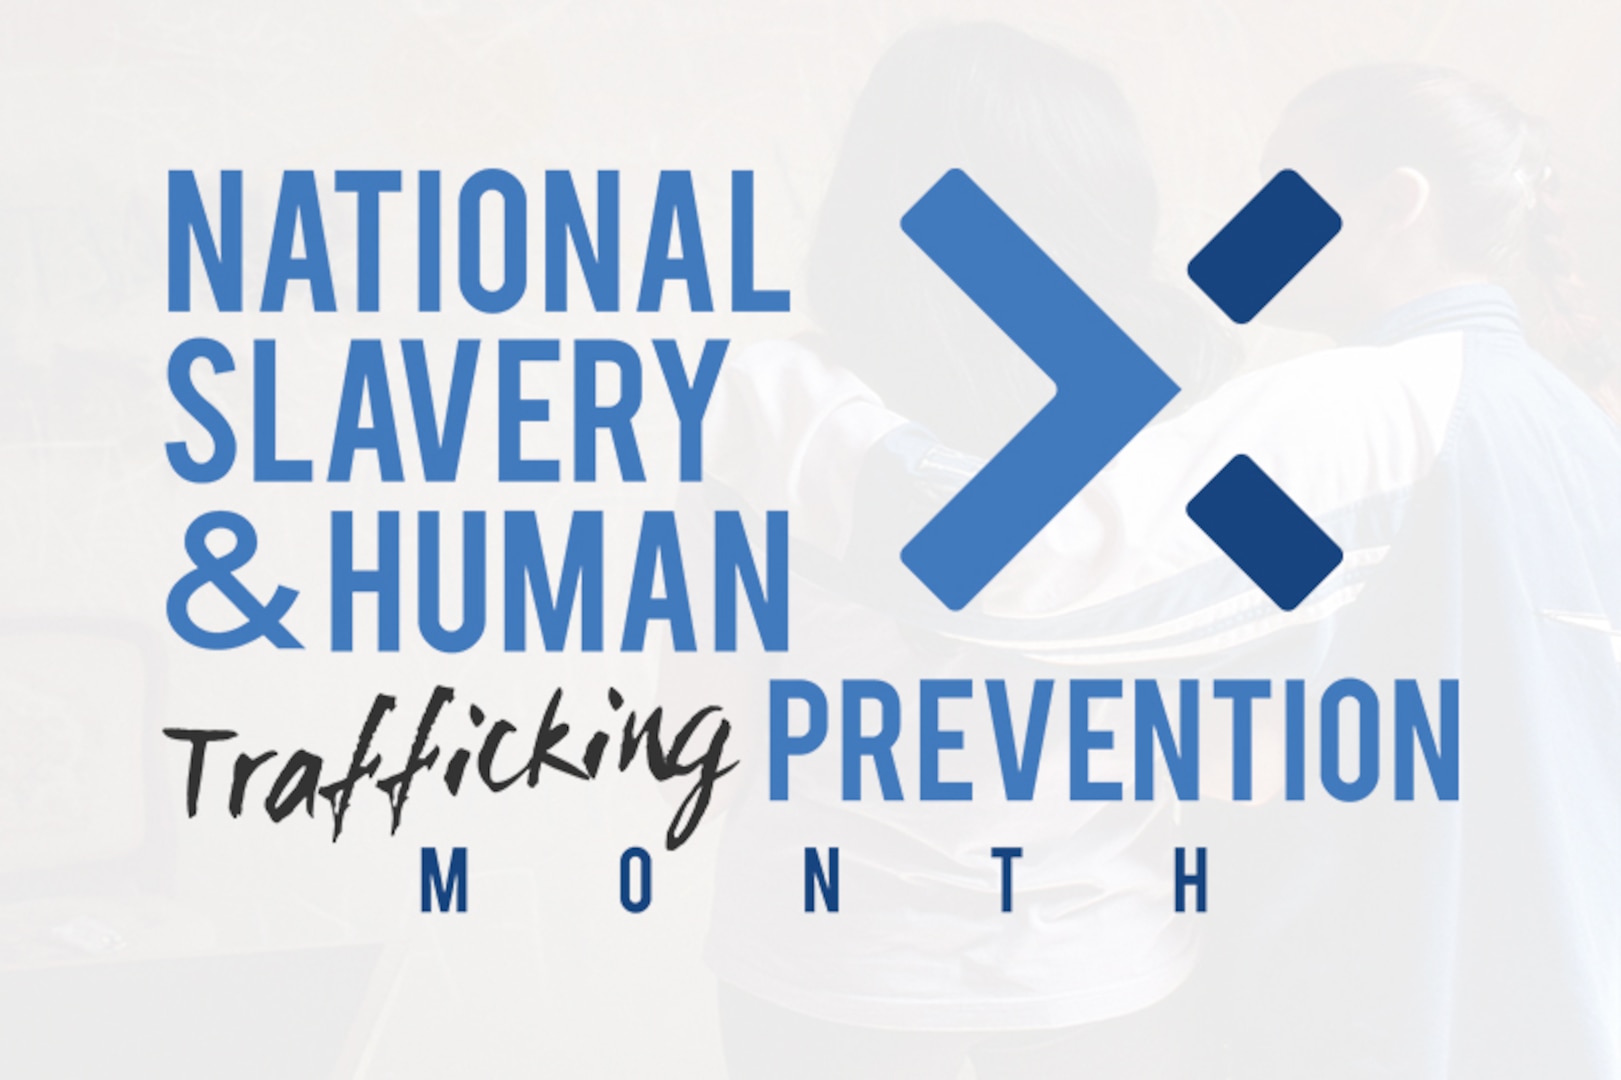 National Slavery & Human Trafficking Prevention Month